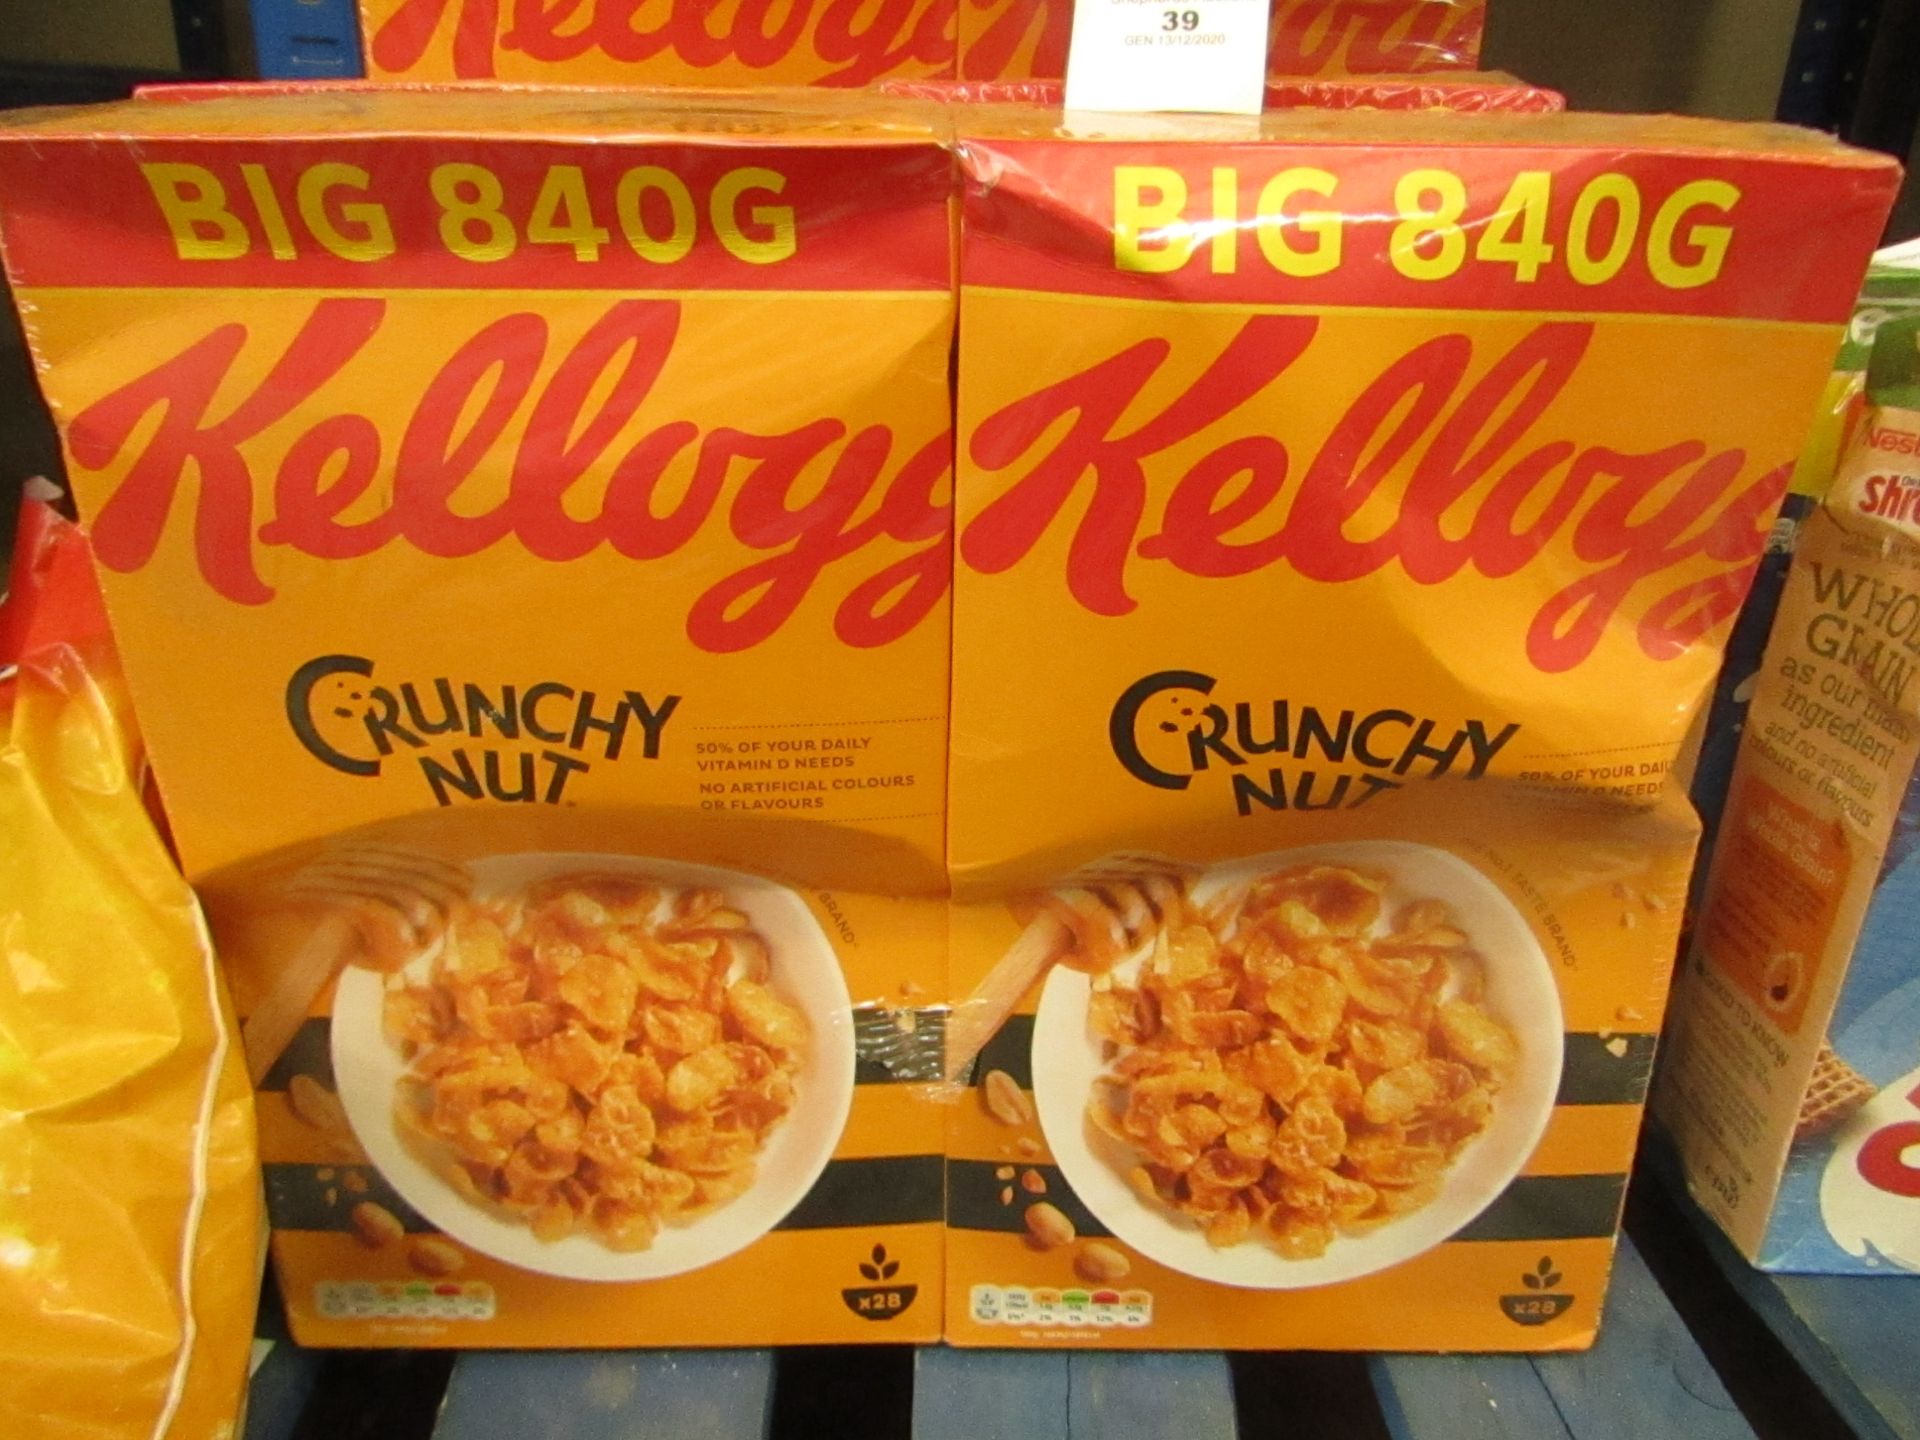 2 x 840g Kellogs Crunchy Nut. BB 7/8/21. Outer boxes may be slightly damaged but products are